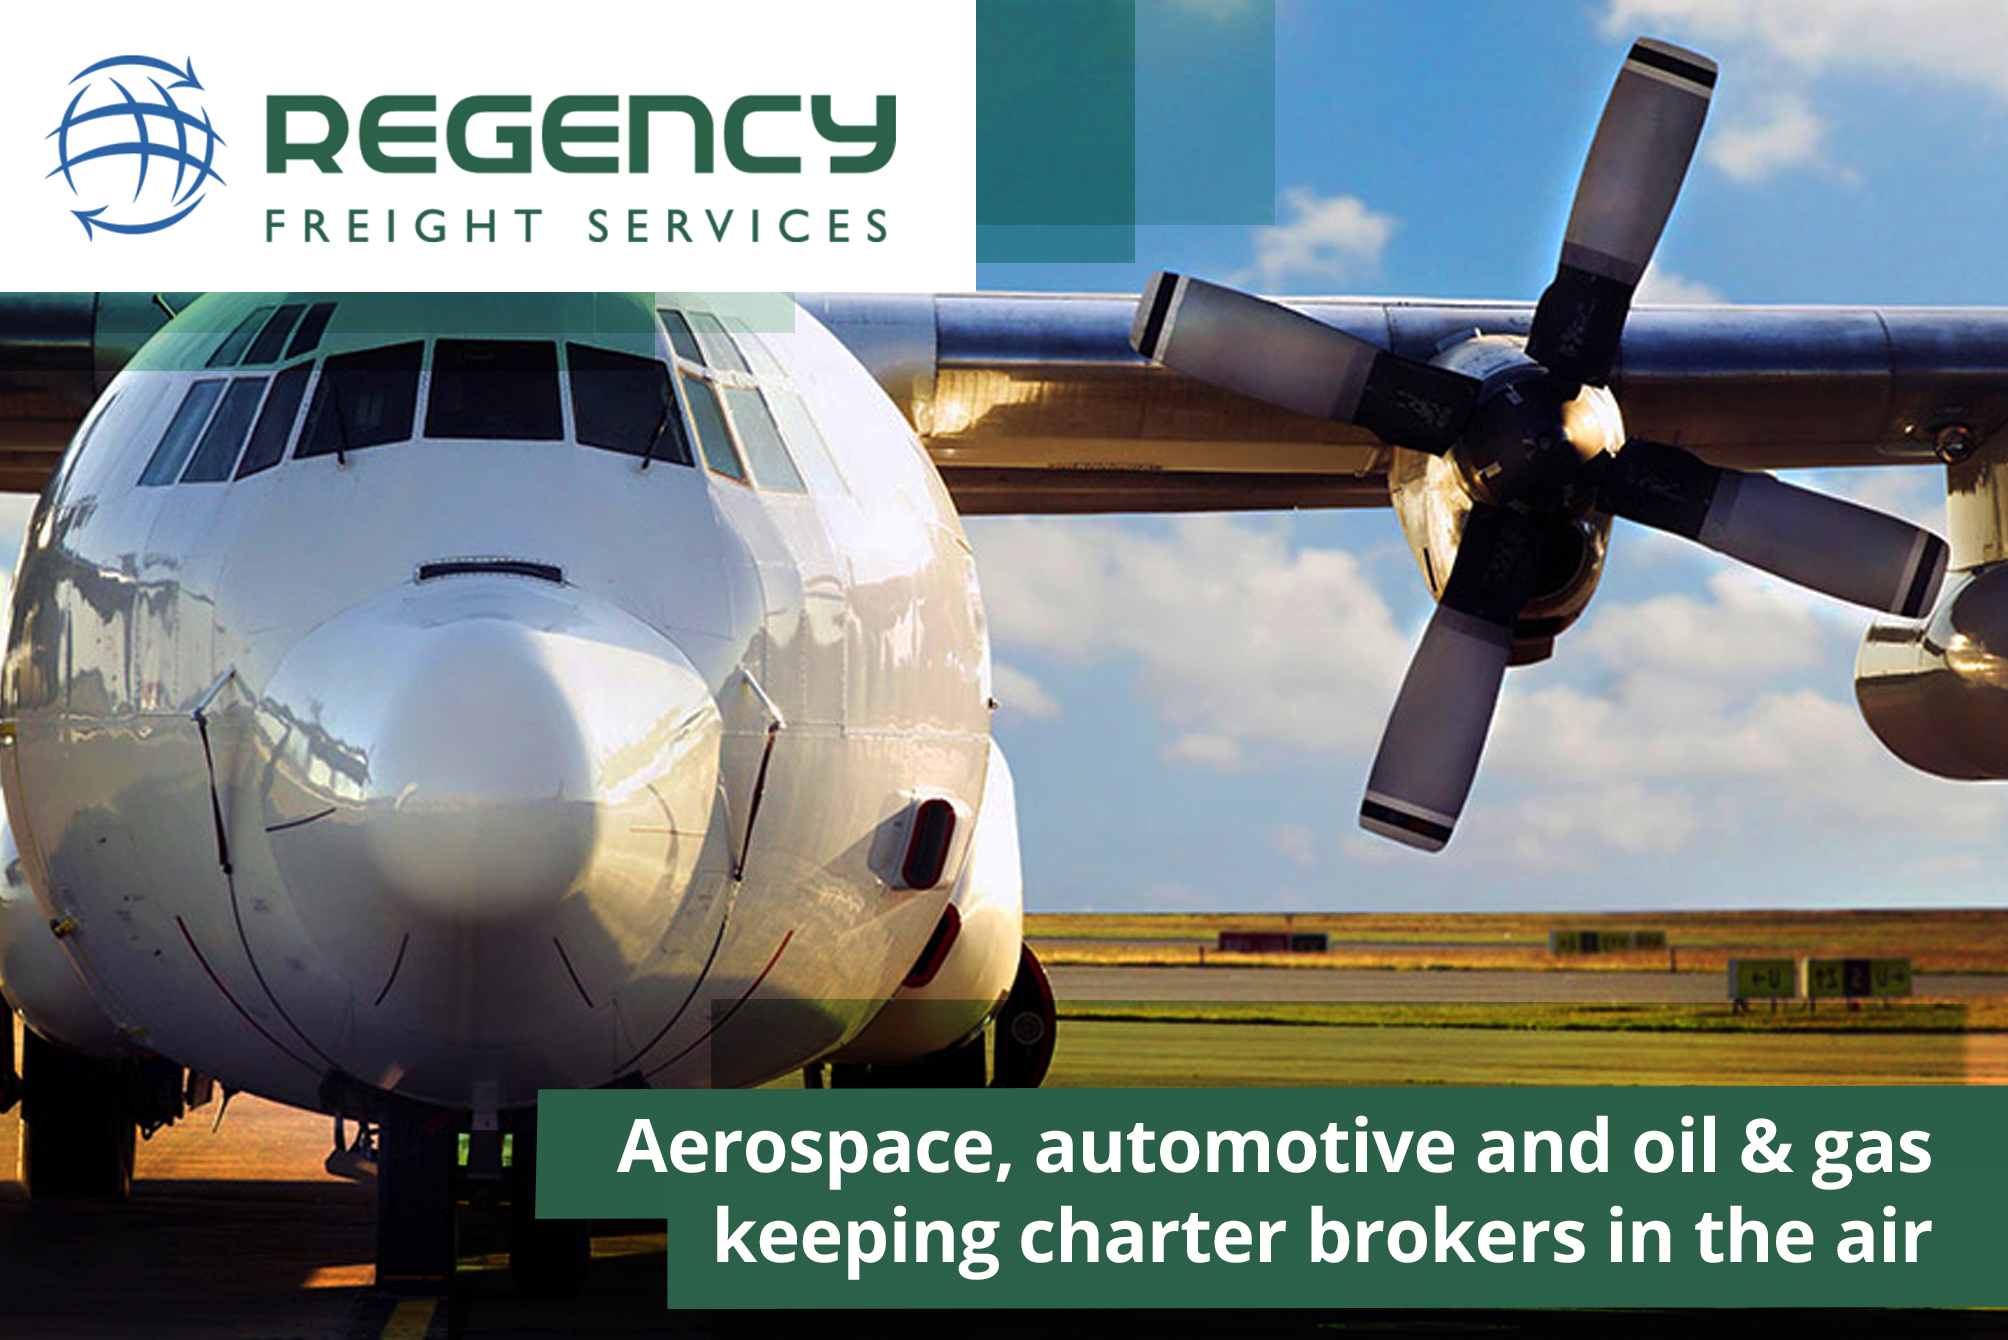 Aerospace, automotive and oil & gas keeping charter brokers in the air